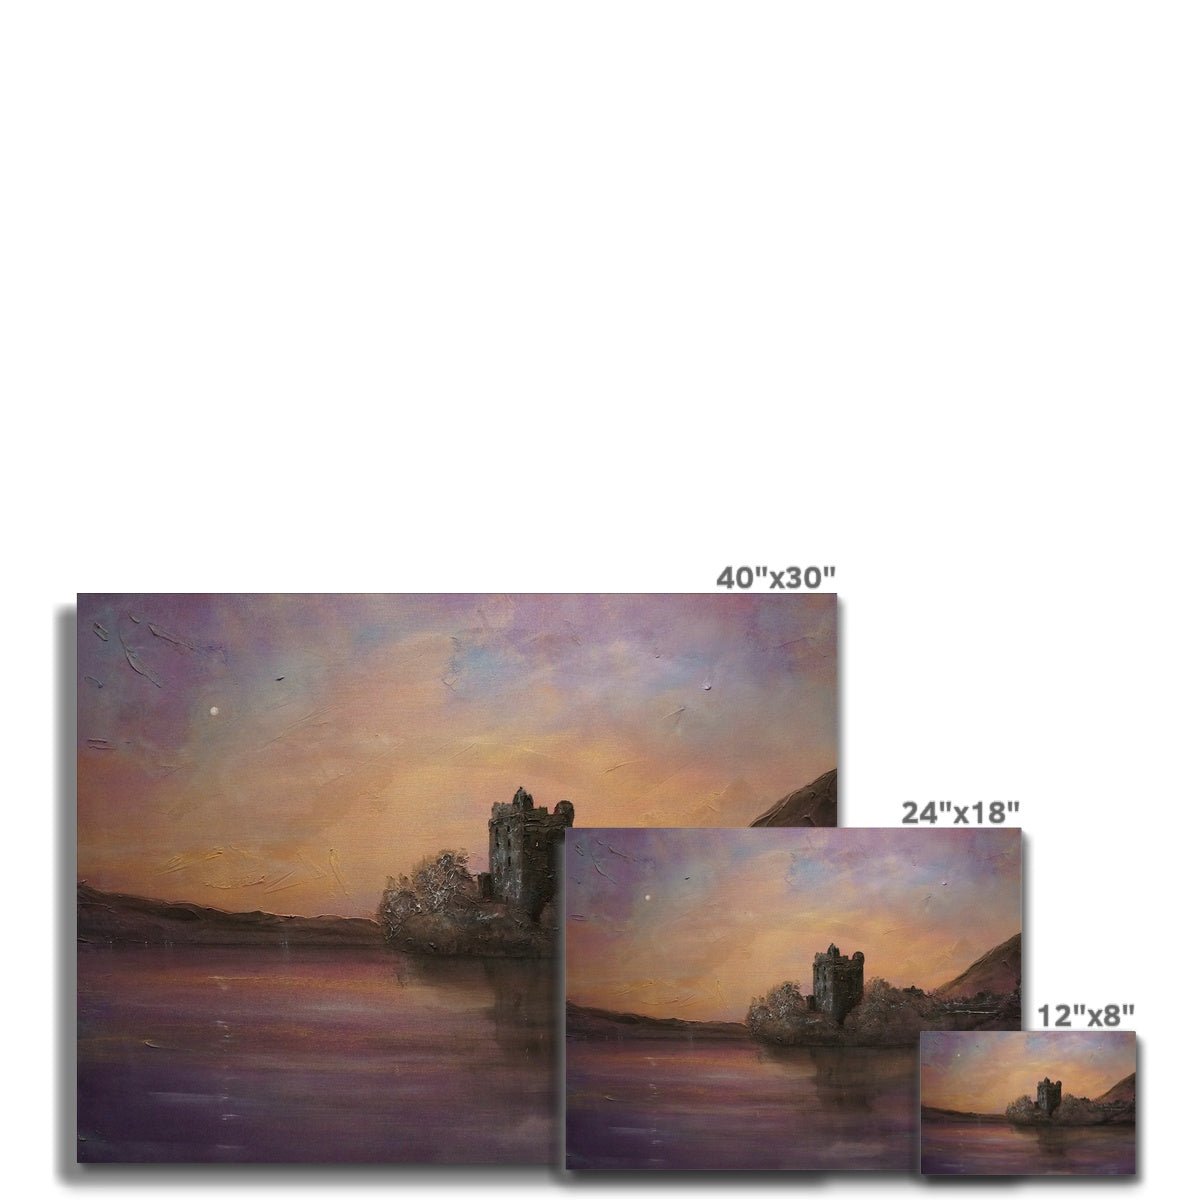 Urquhart Castle Moonlight Painting | Canvas From Scotland-Contemporary Stretched Canvas Prints-Historic & Iconic Scotland Art Gallery-Paintings, Prints, Homeware, Art Gifts From Scotland By Scottish Artist Kevin Hunter